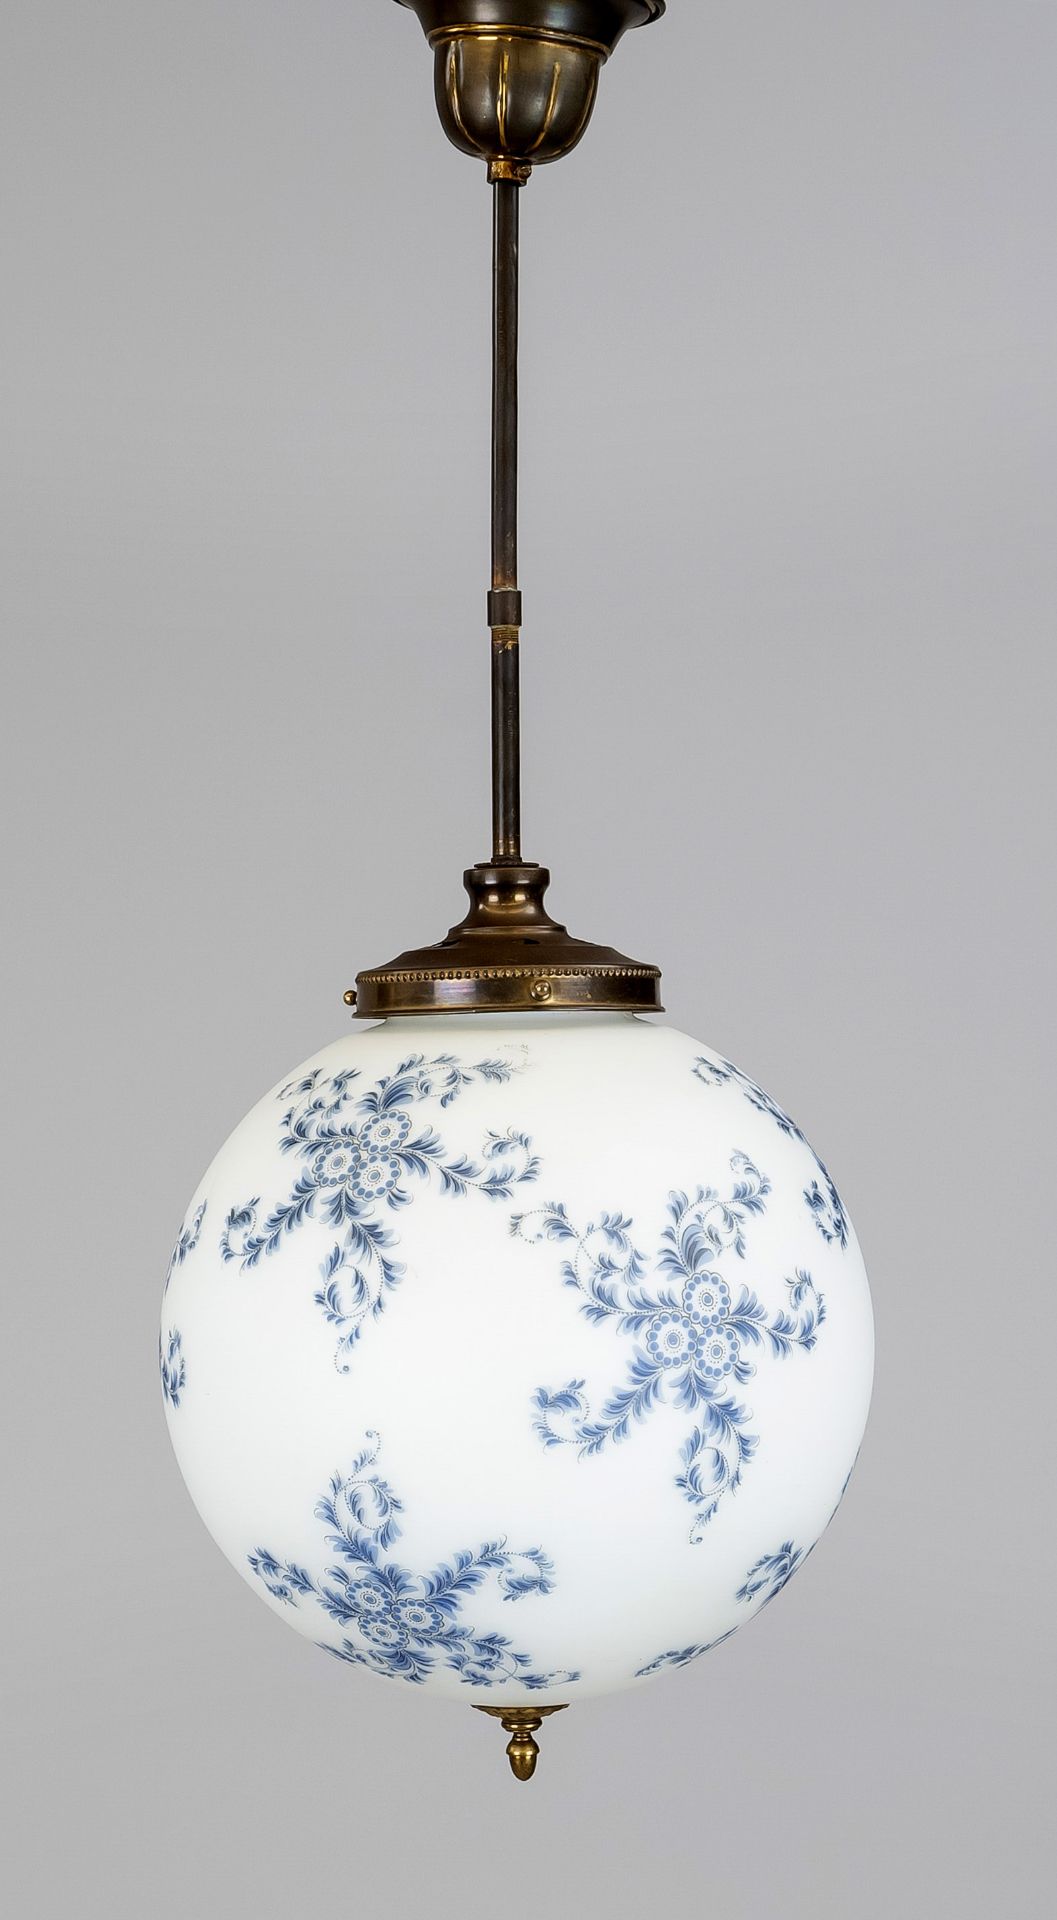 Ceiling lamp, late 19th c., large frosted glass globe with blue rotating floral ornament (shade